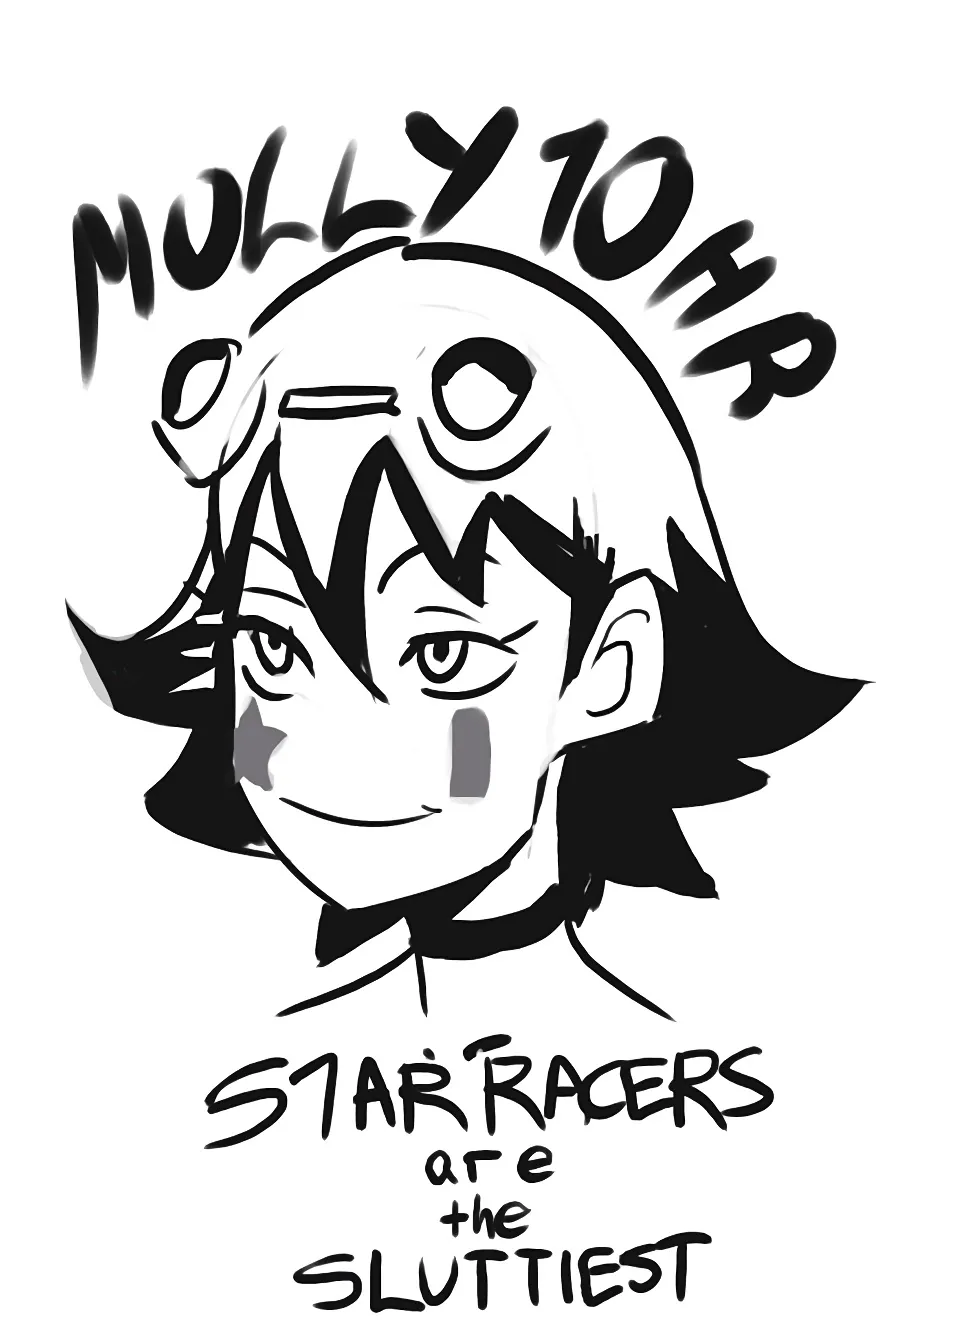 Molly 10hr Star Racers are the sluttiest - Page 1